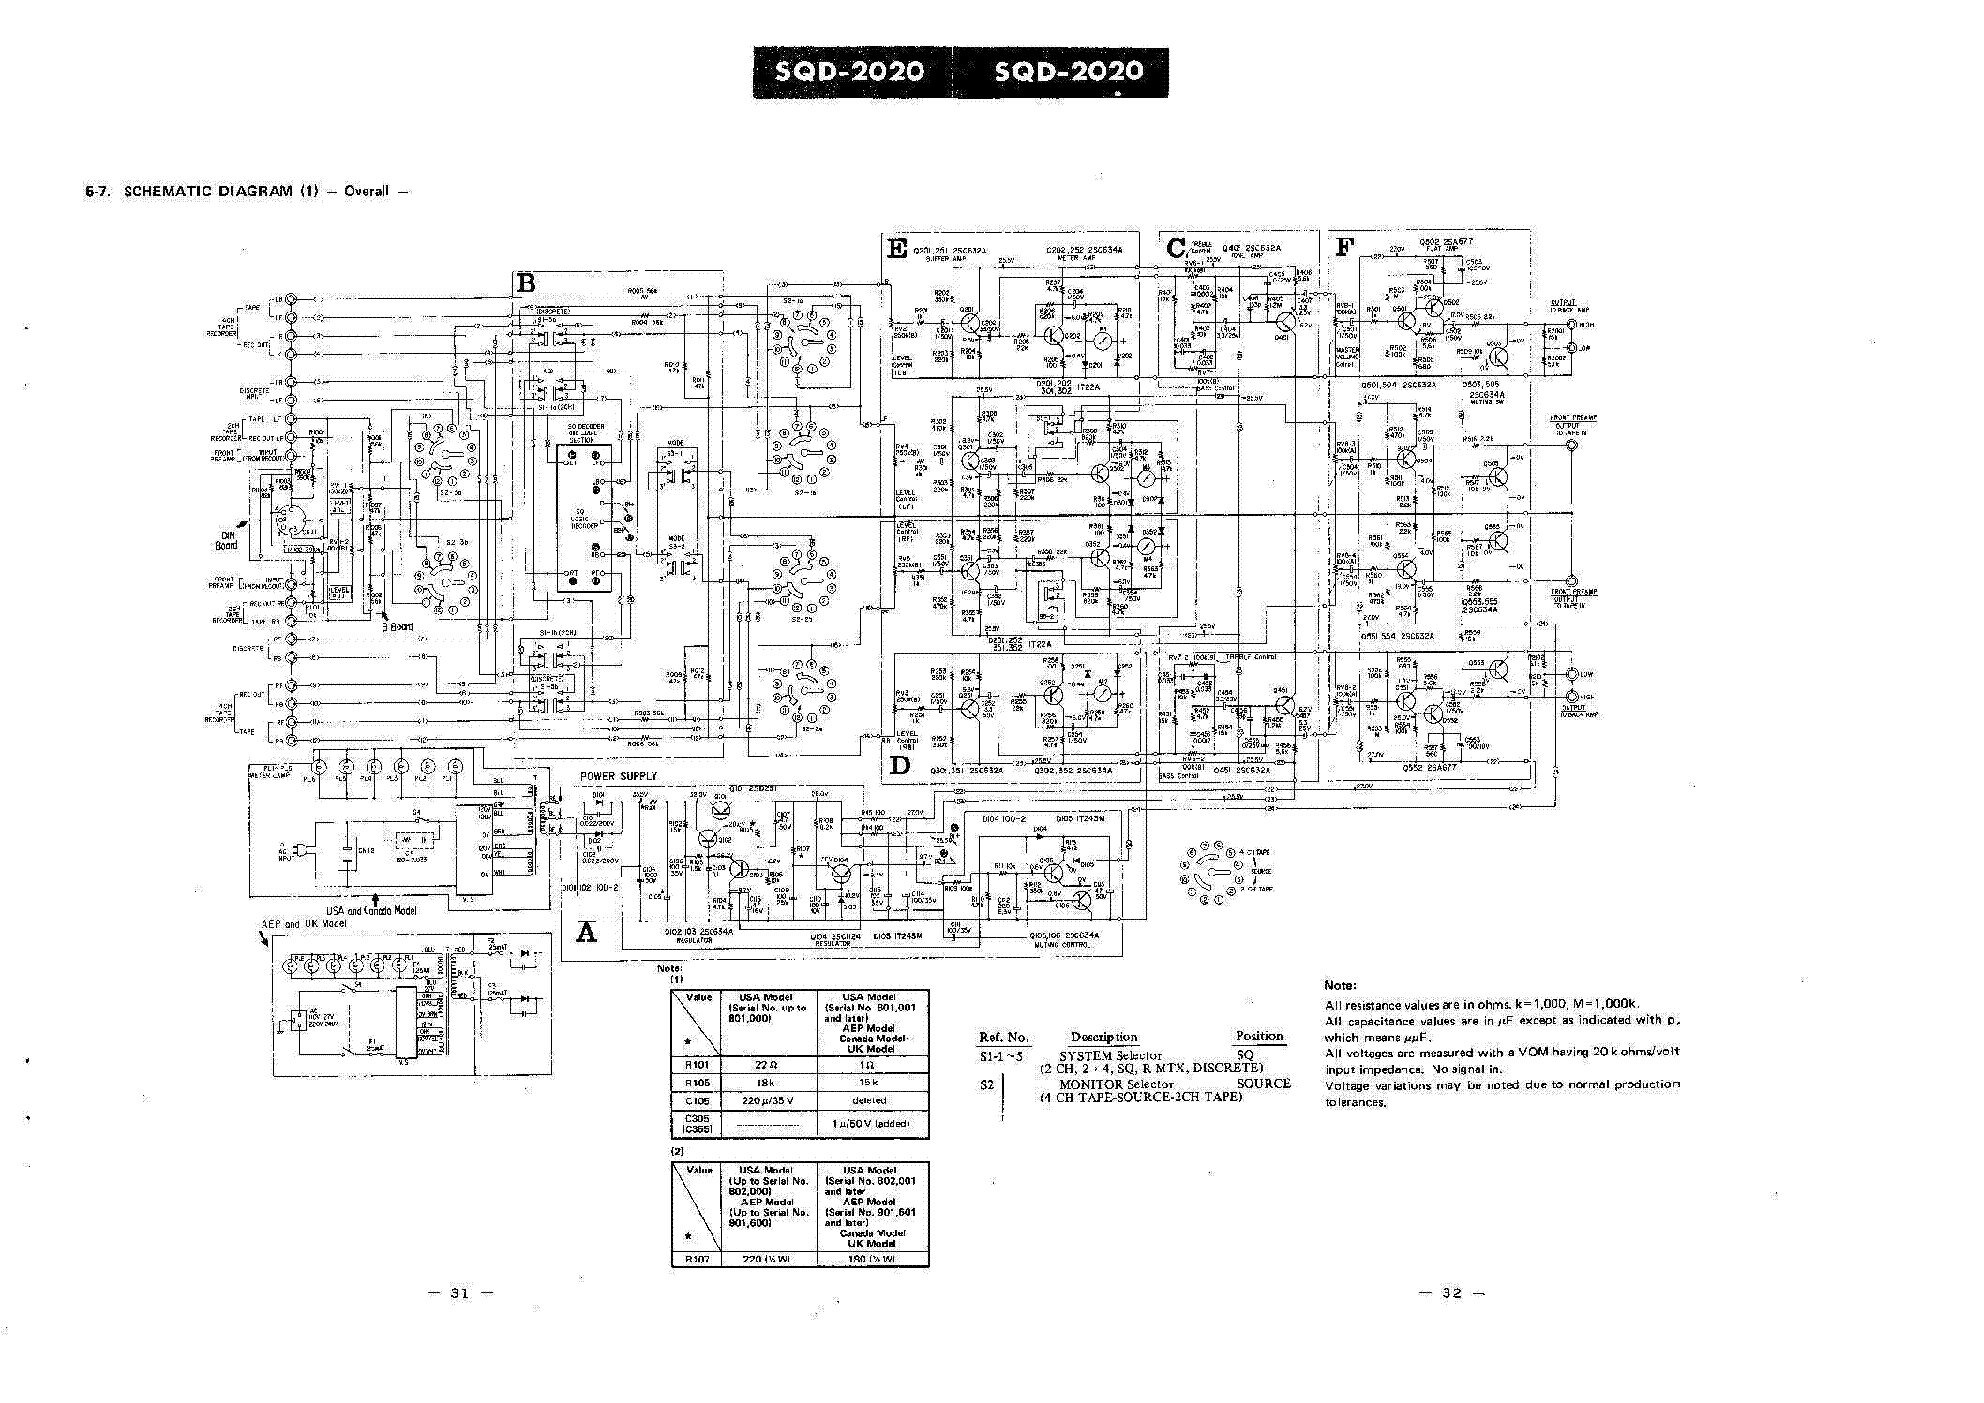 SONY SQD-2020 SCHEMATIC DIAGRAM service manual (1st page)